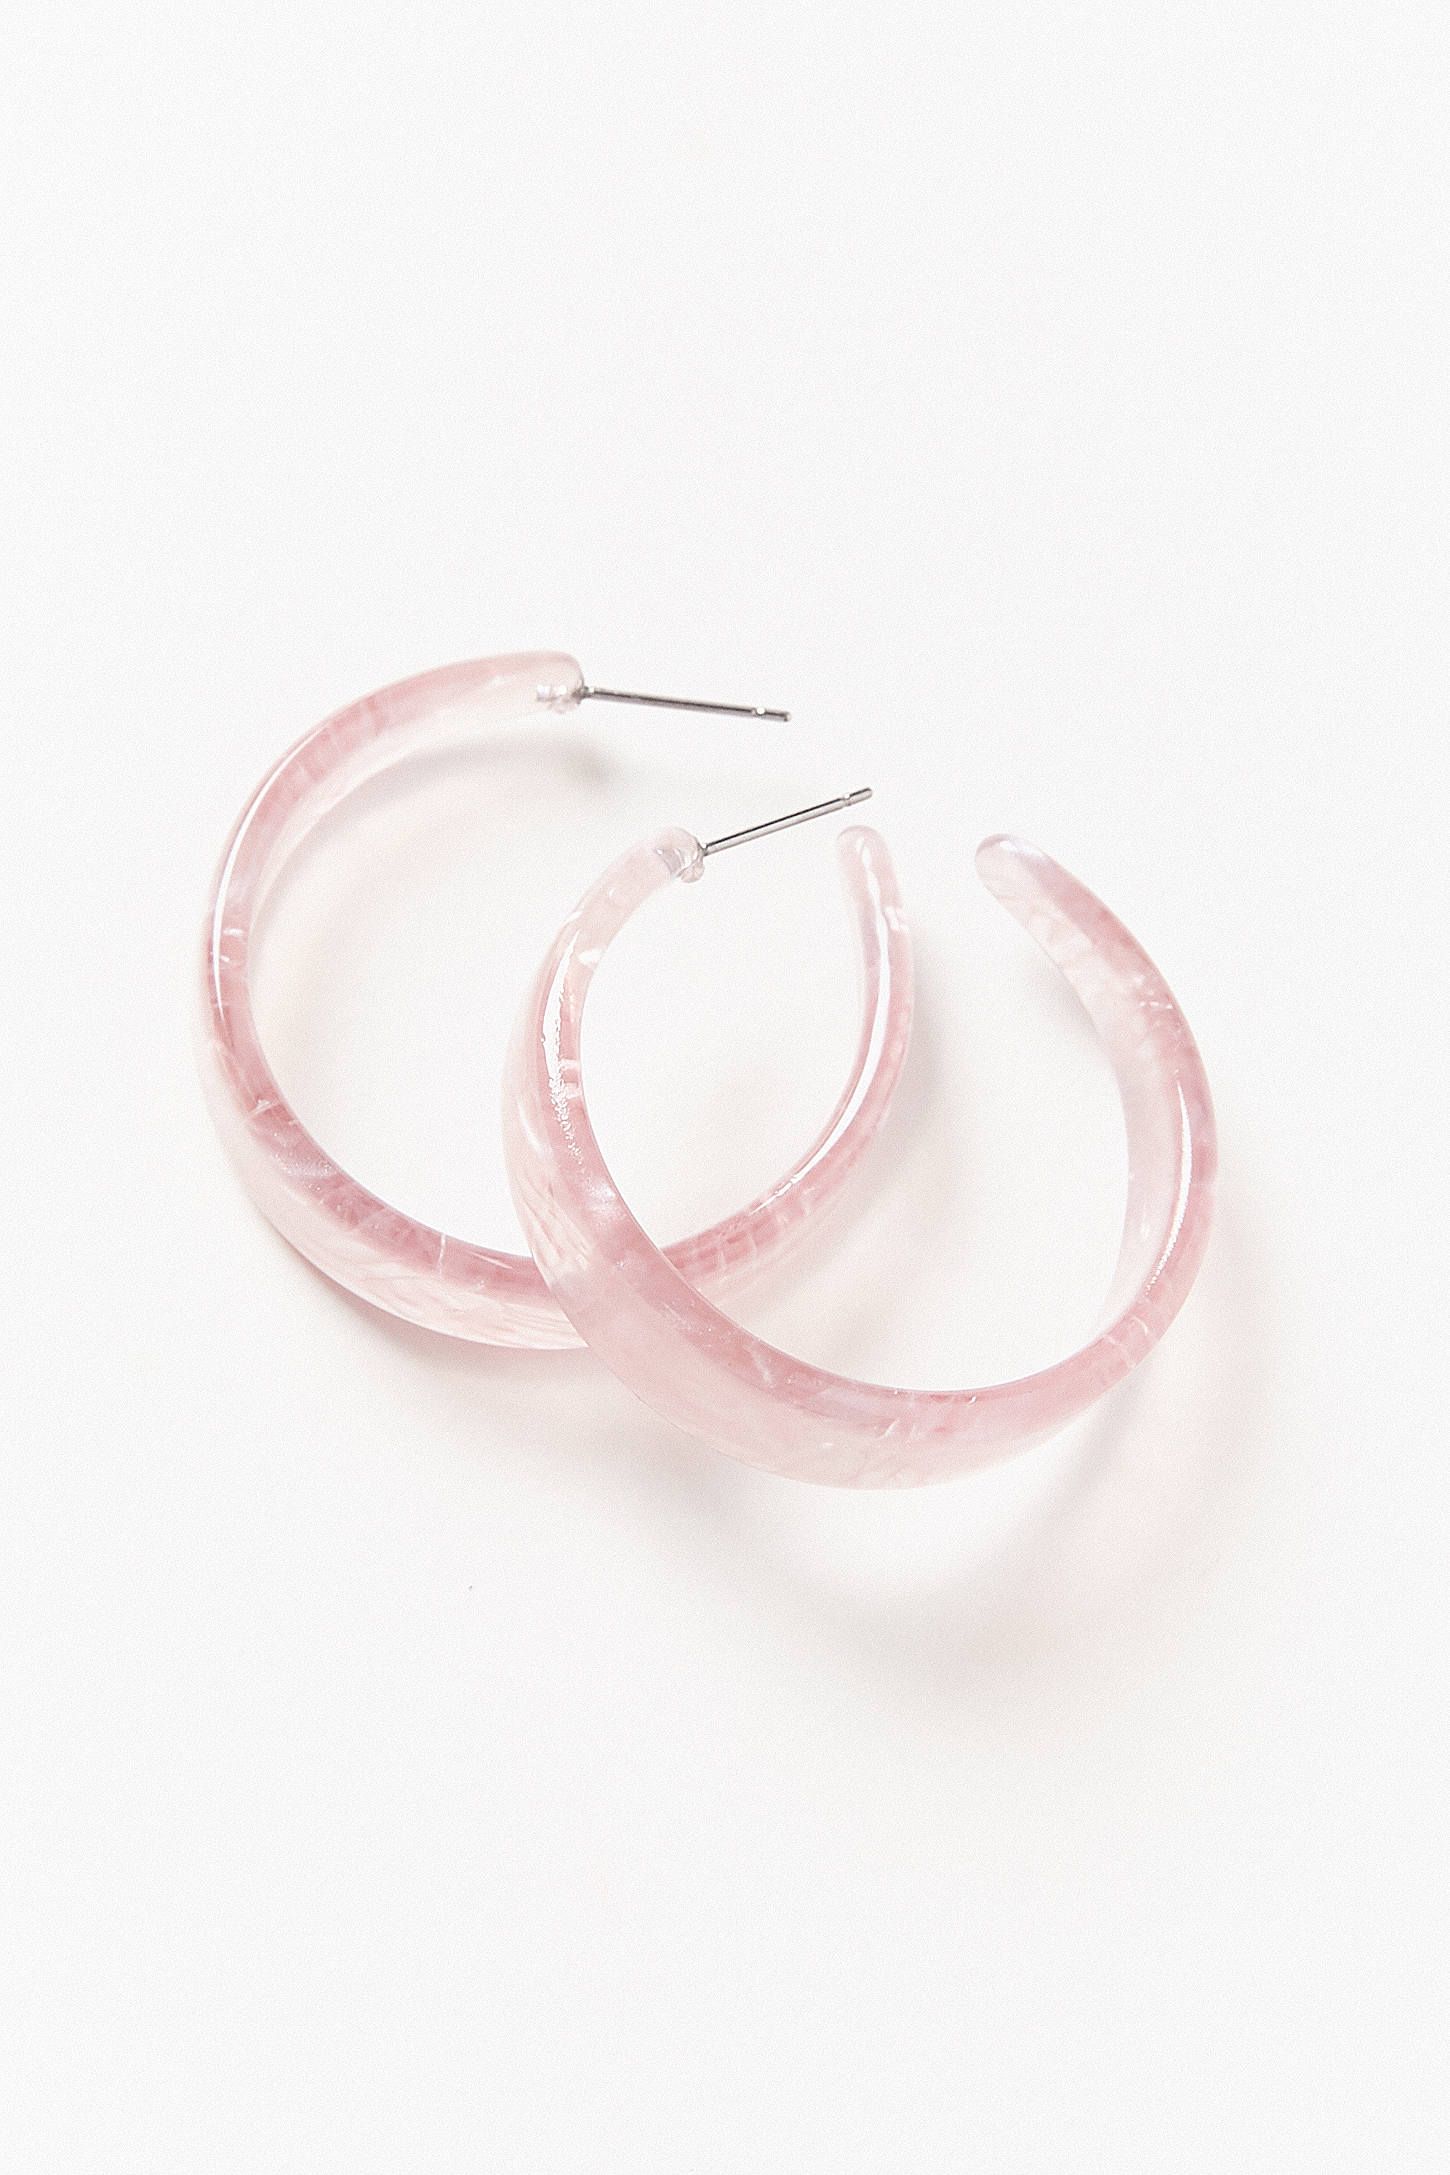 lucite hoop earrings are all the rage & we want in